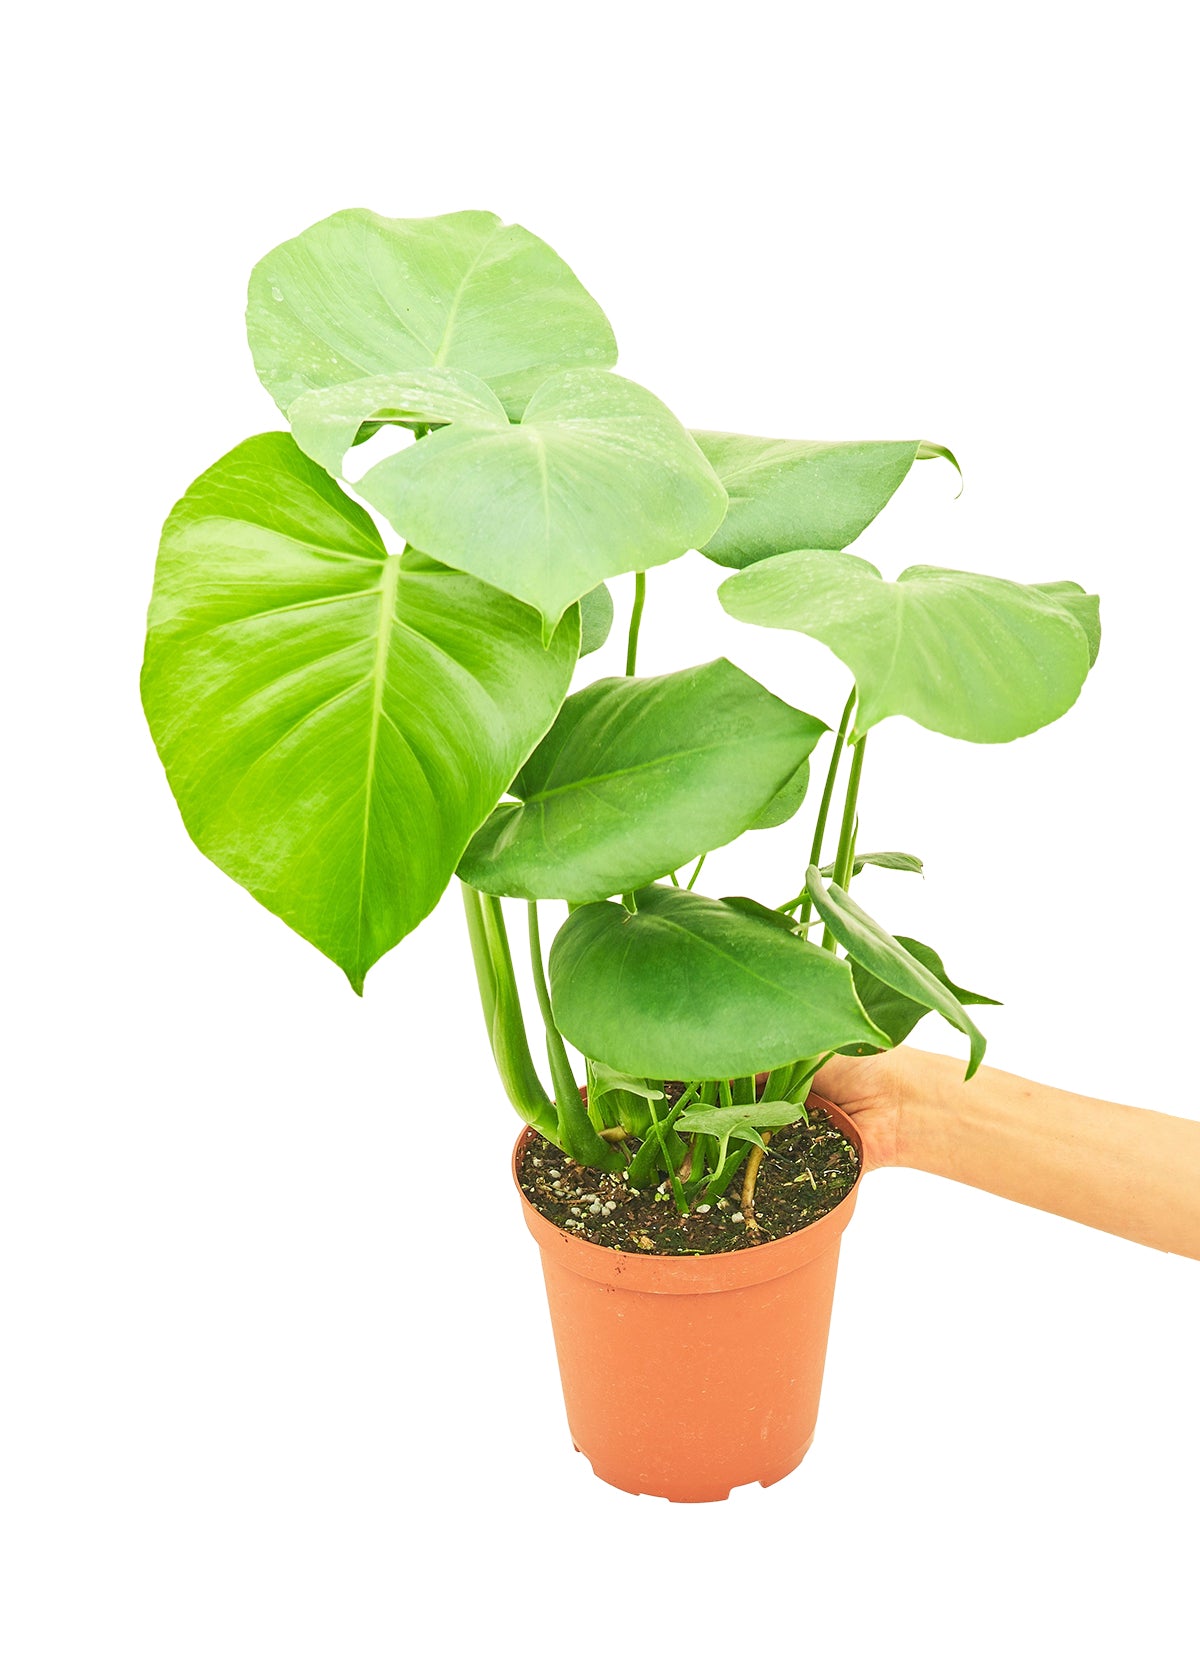 Medium size Monstera Swiss Cheese Plant in a growers pot with a white background with a hand holding the pot to see the top view